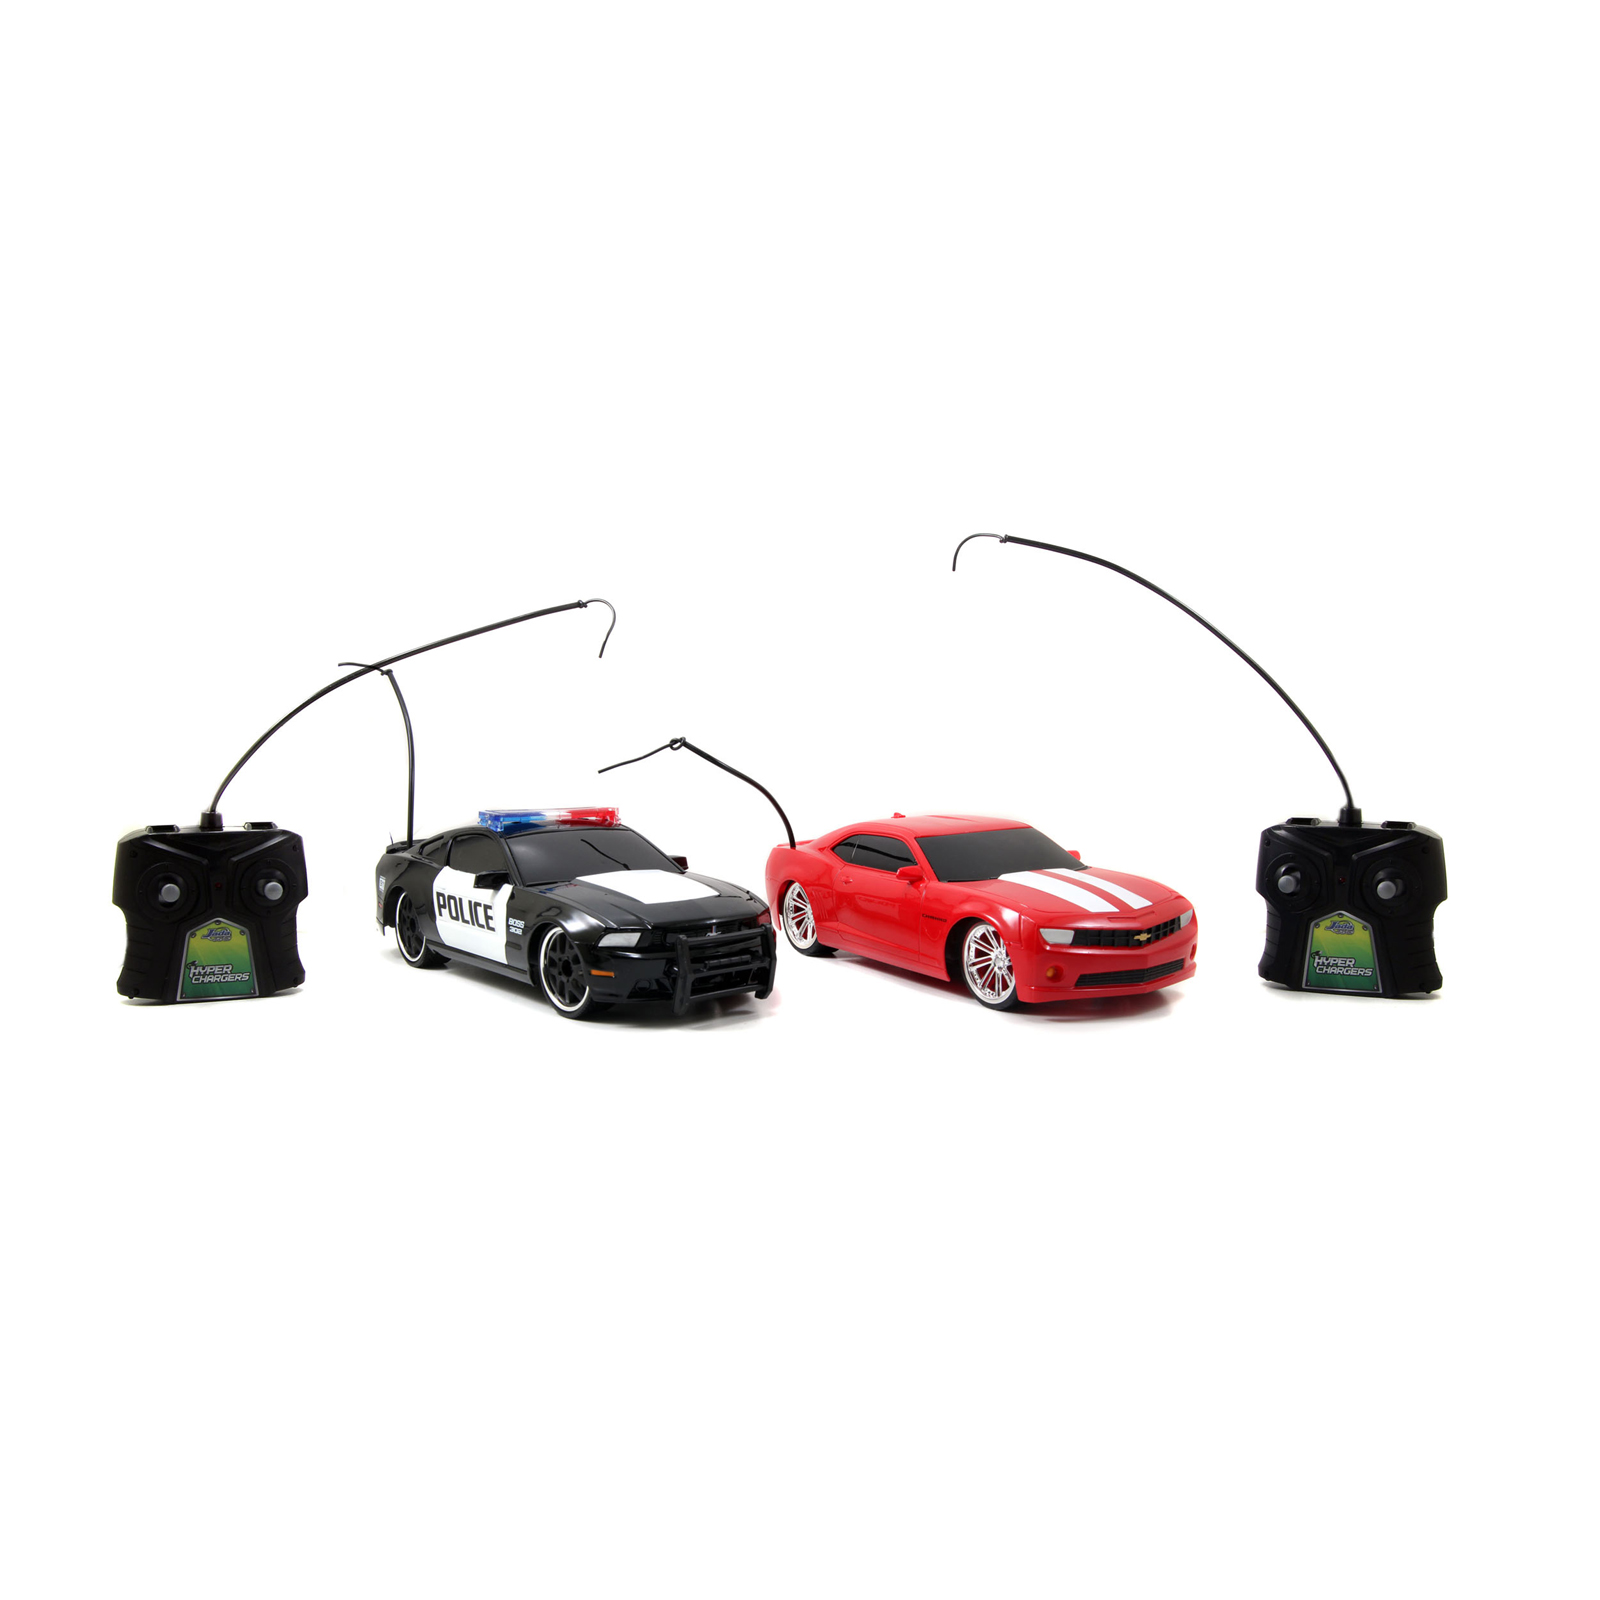 HyperChargers 1:16 2012 Mustang Police vs 2010 Camaro SS Heat Chase Twin Pack Remote Control Car Set